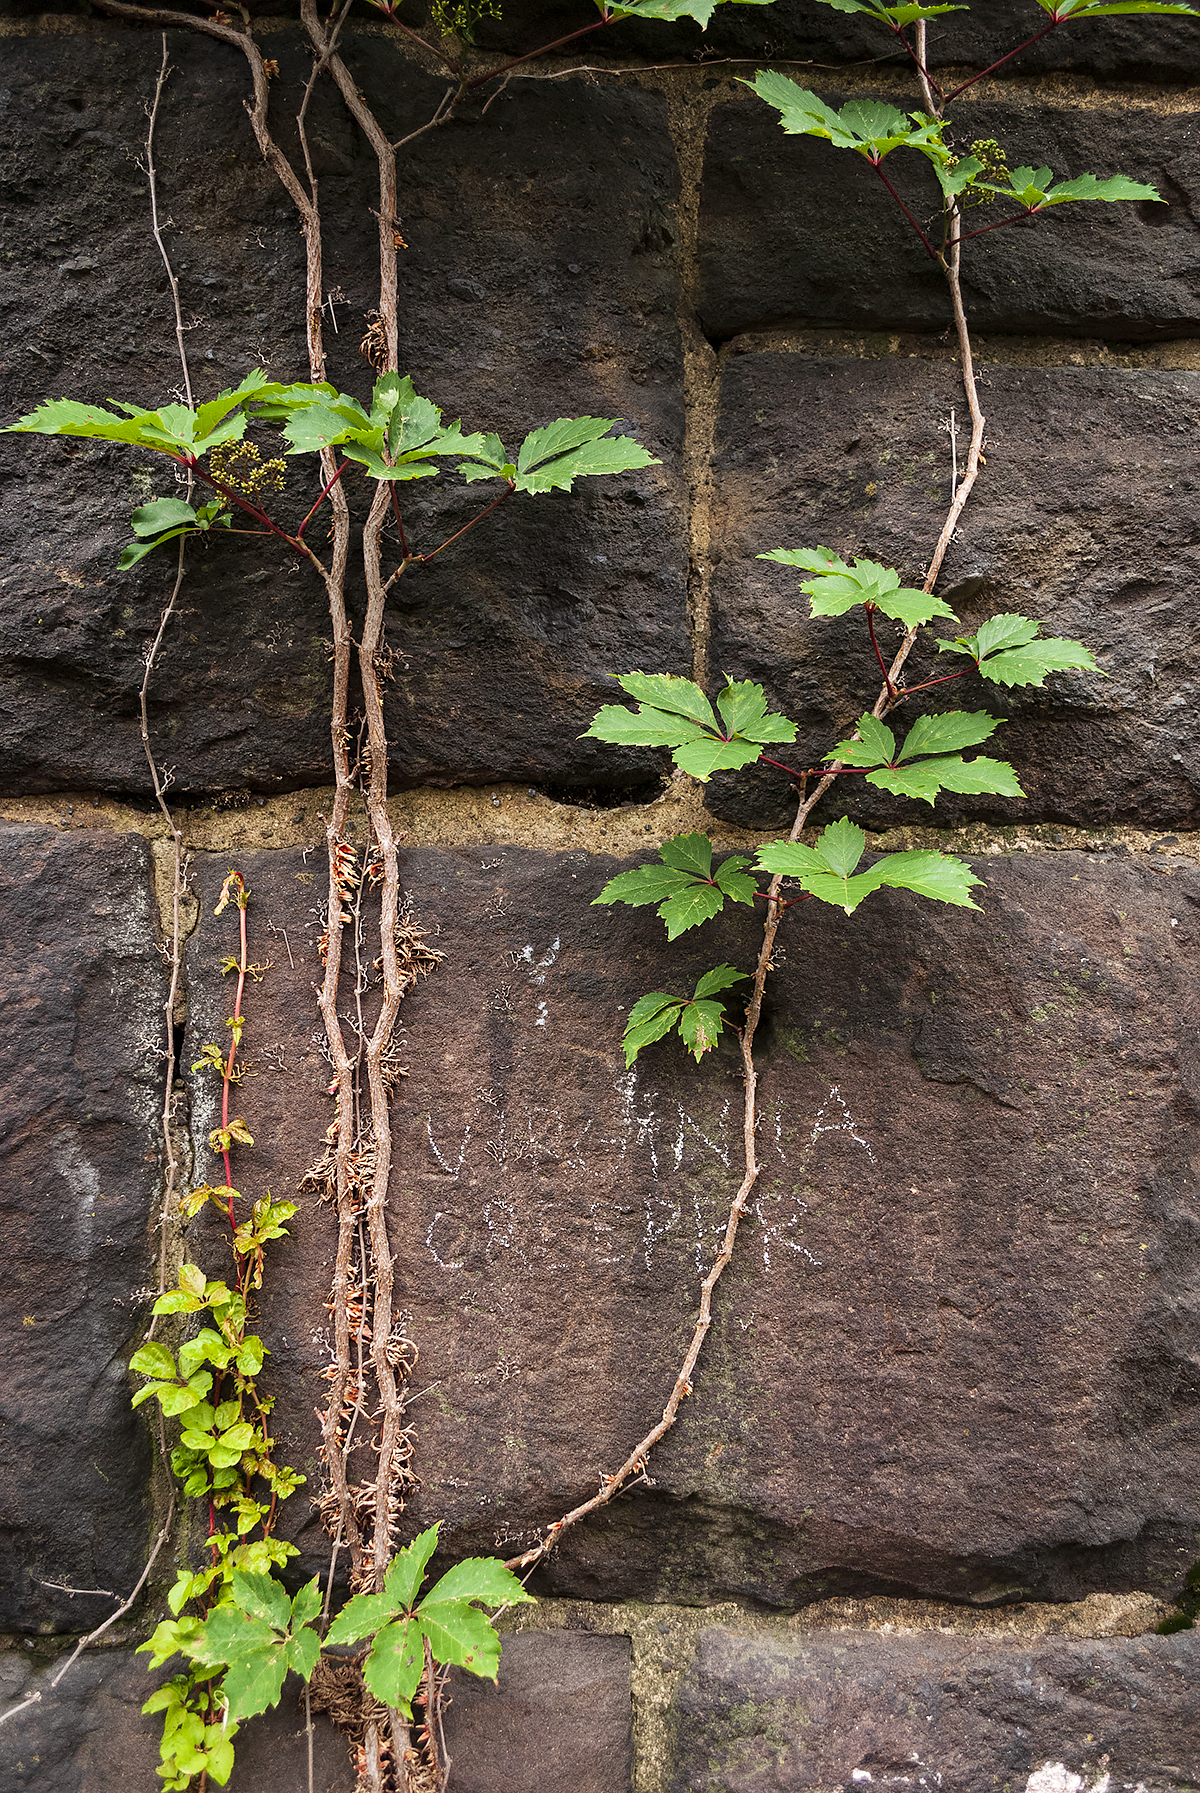 Photograph of plant labeled with chalk growing on Embankment stones, by Kerry Kolenut